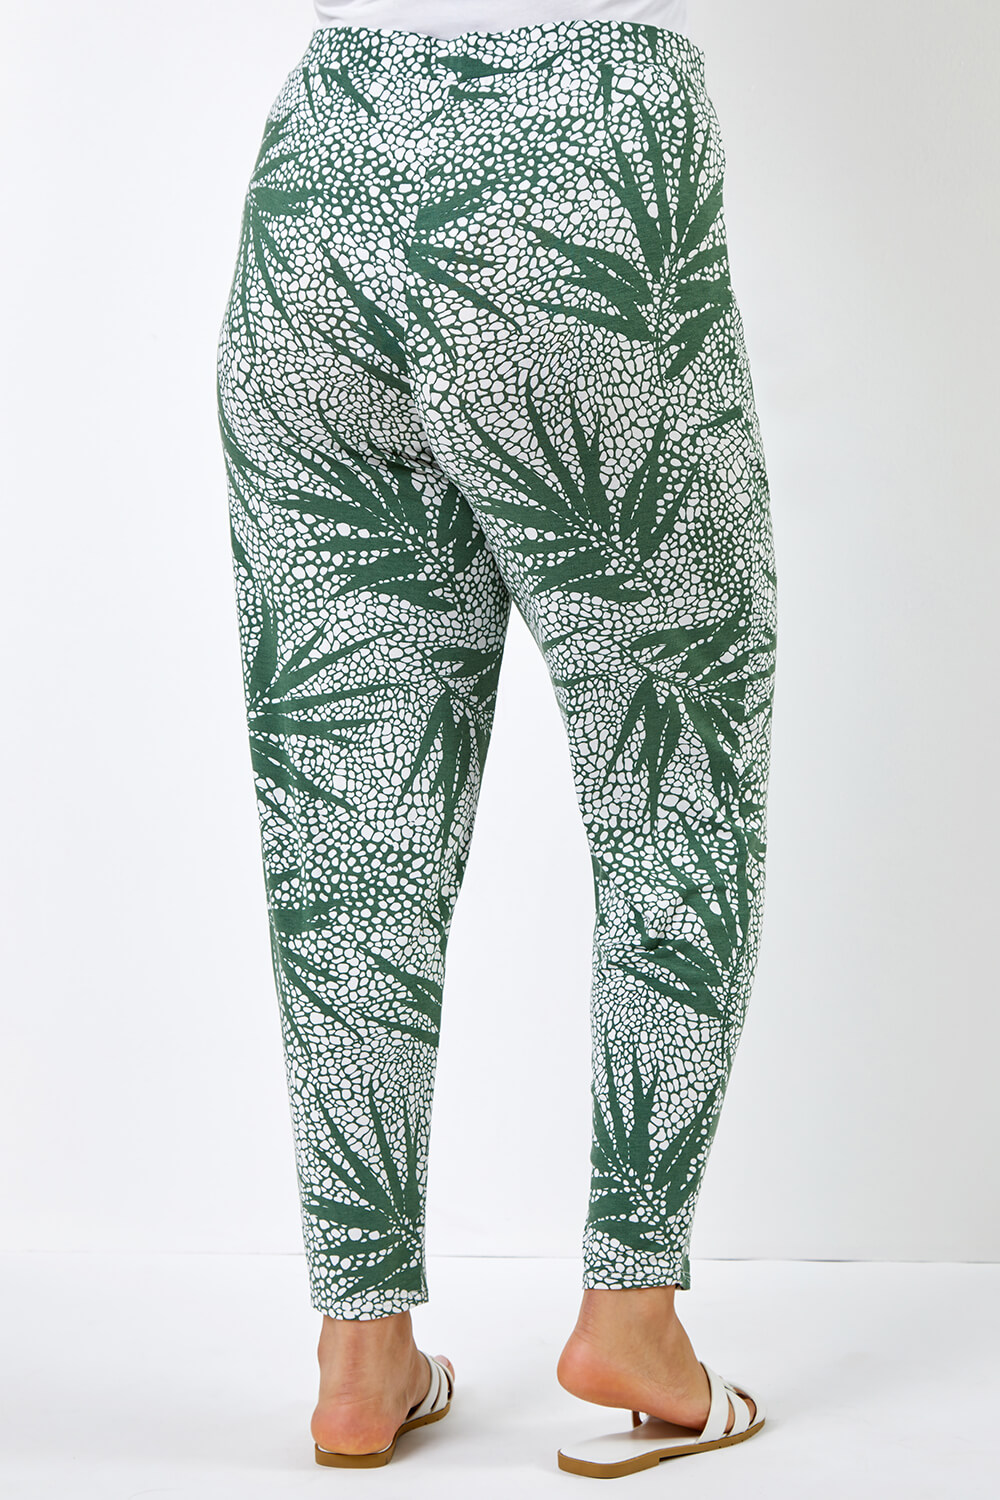 KHAKI Curve Leaf Print Jersey Tapered Trouser, Image 2 of 4